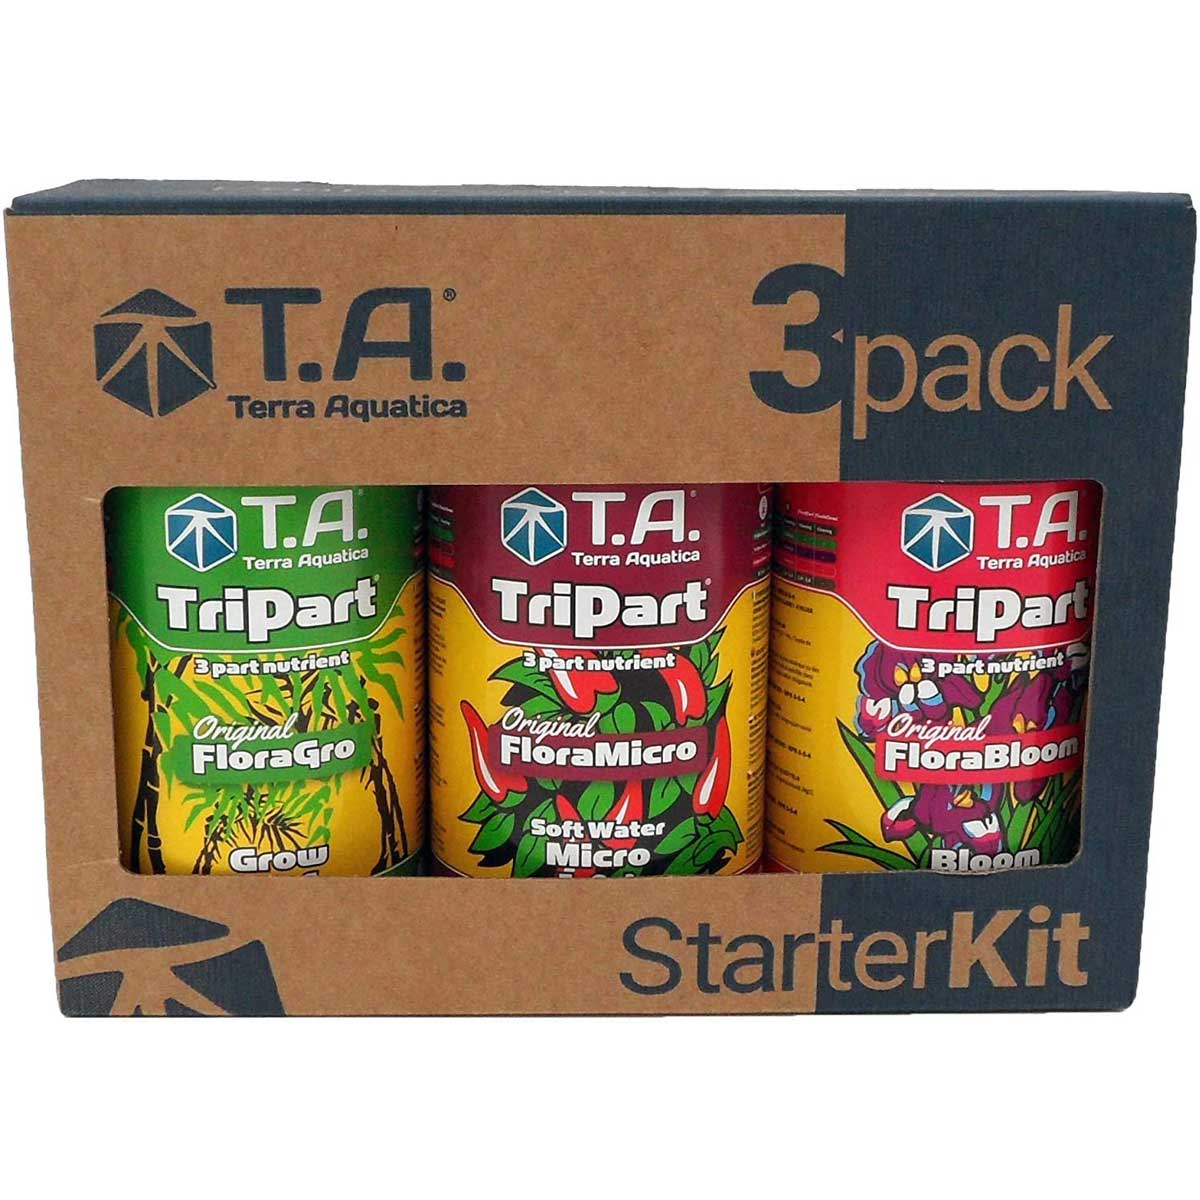 T.A. 3-Pack TriPart Starter Kit Soft Water スターターキット 500ml x 3本セット （3パートベース肥料）